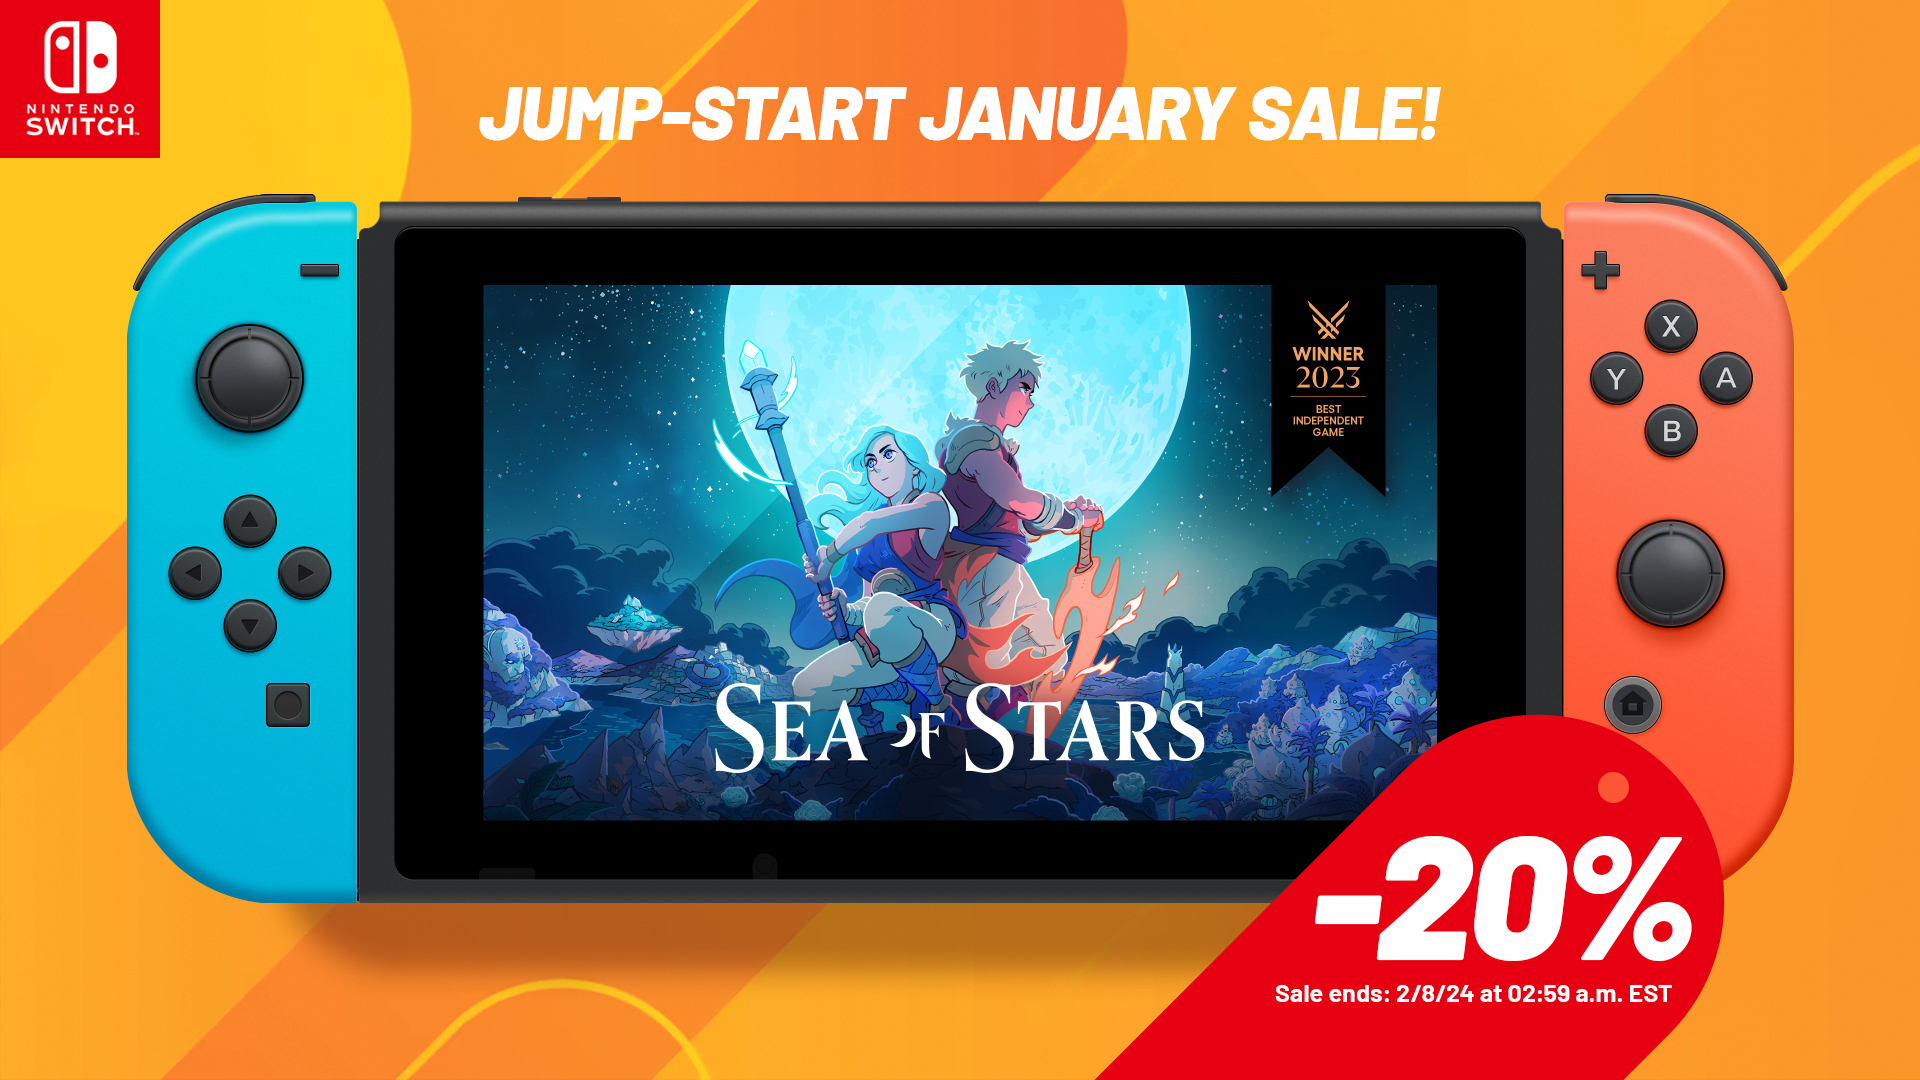 Sea of Stars is available now on the Nintendo Switch